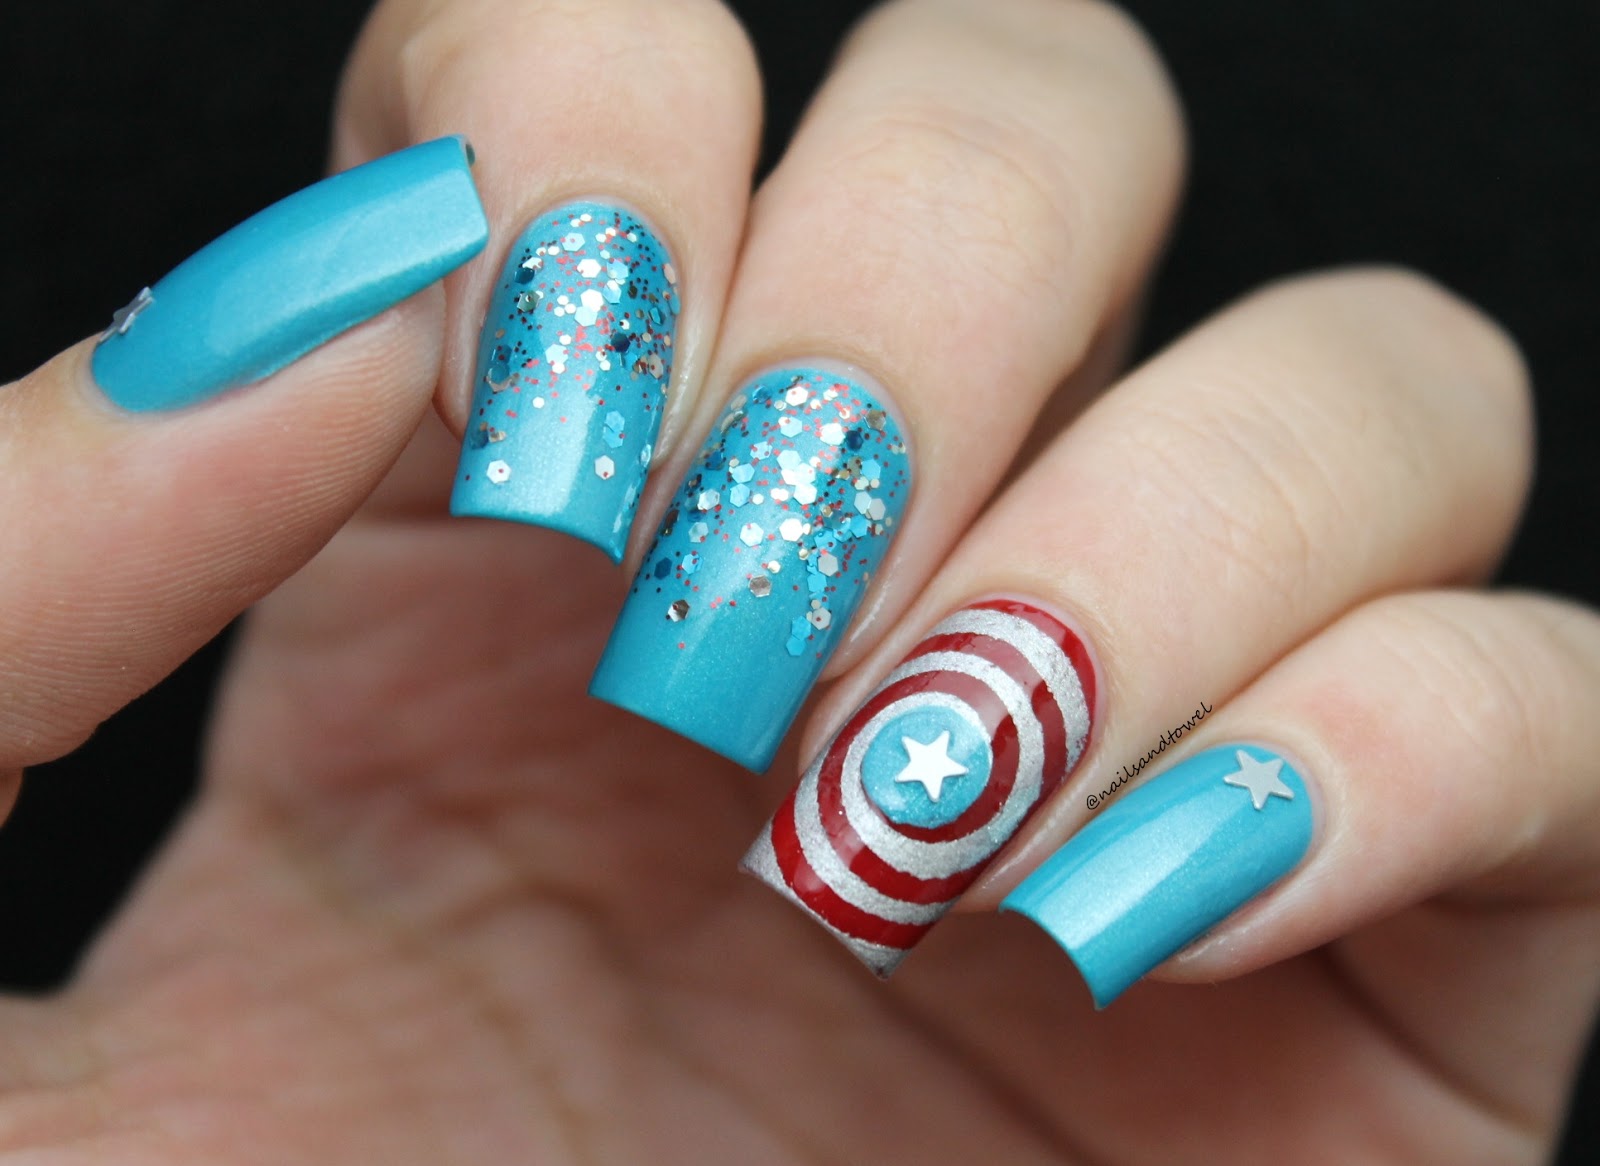 6. "Girly Captain America Nail Designs for Short Nails" - wide 2